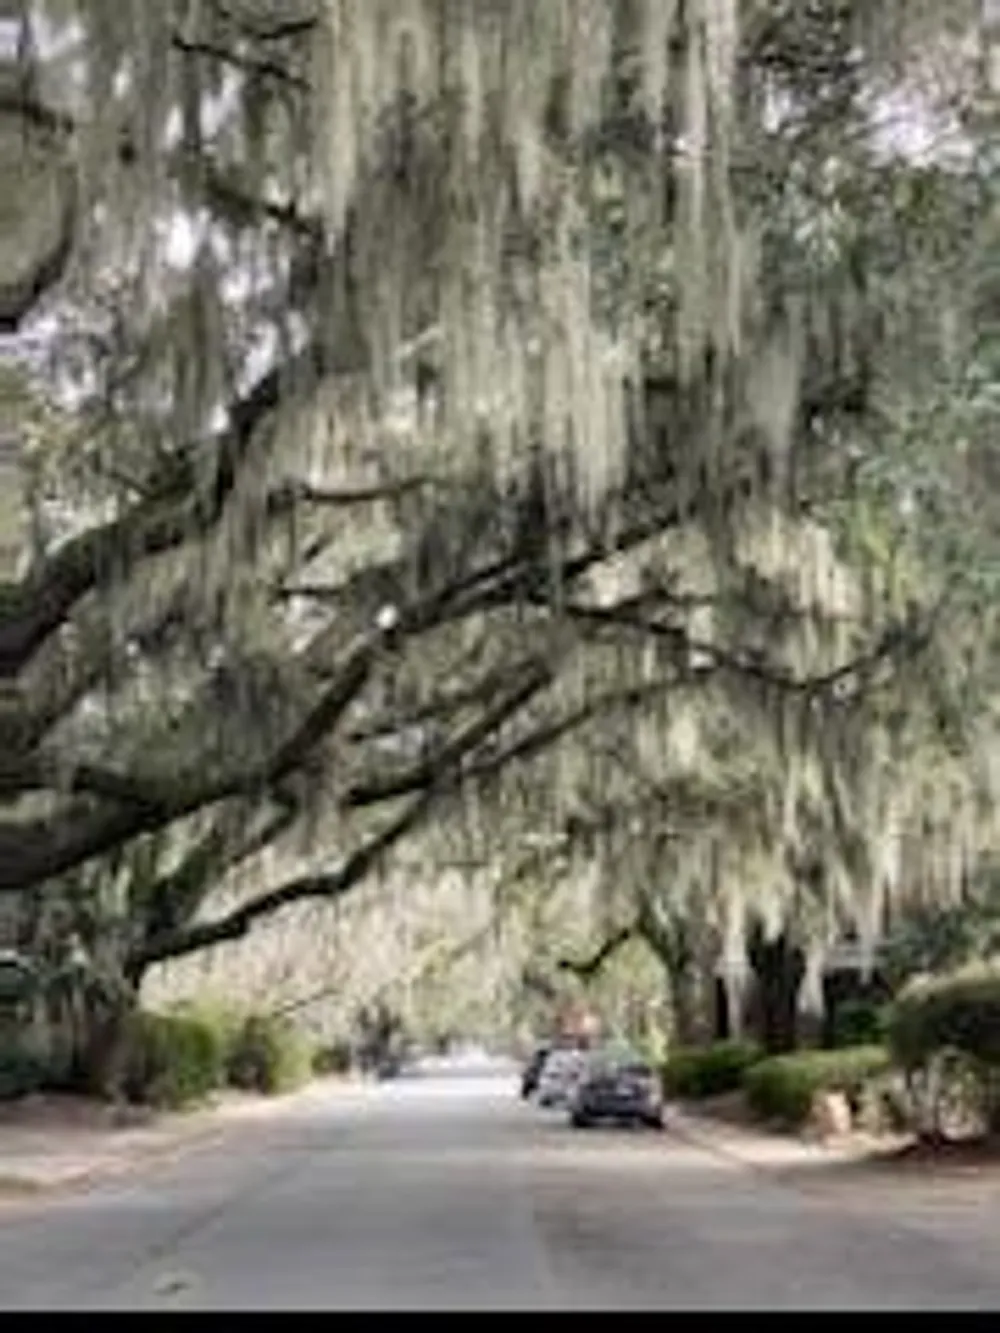 A tree-lined street is overhung with the grey Spanish moss-draped branches of majestic live oaks creating a serene and picturesque Southern scene